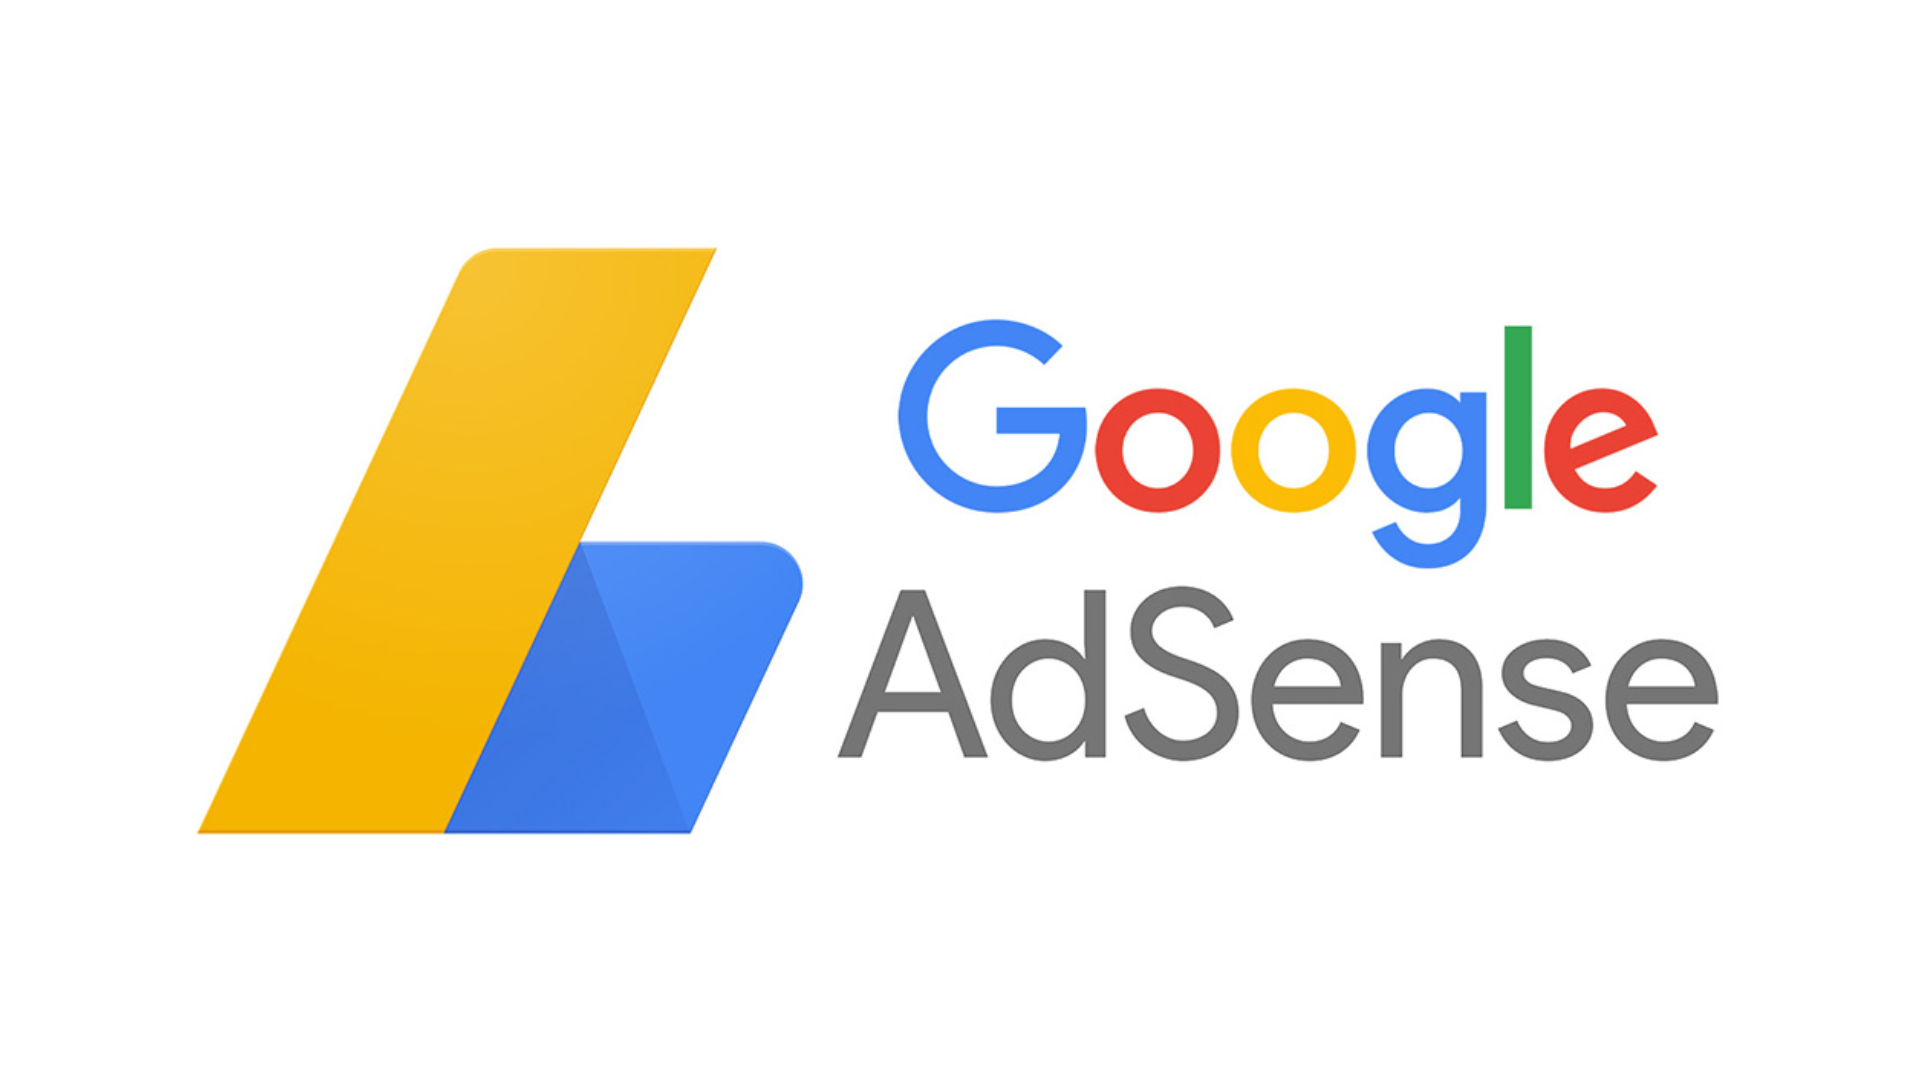 Google releases a new ad code in AdSense